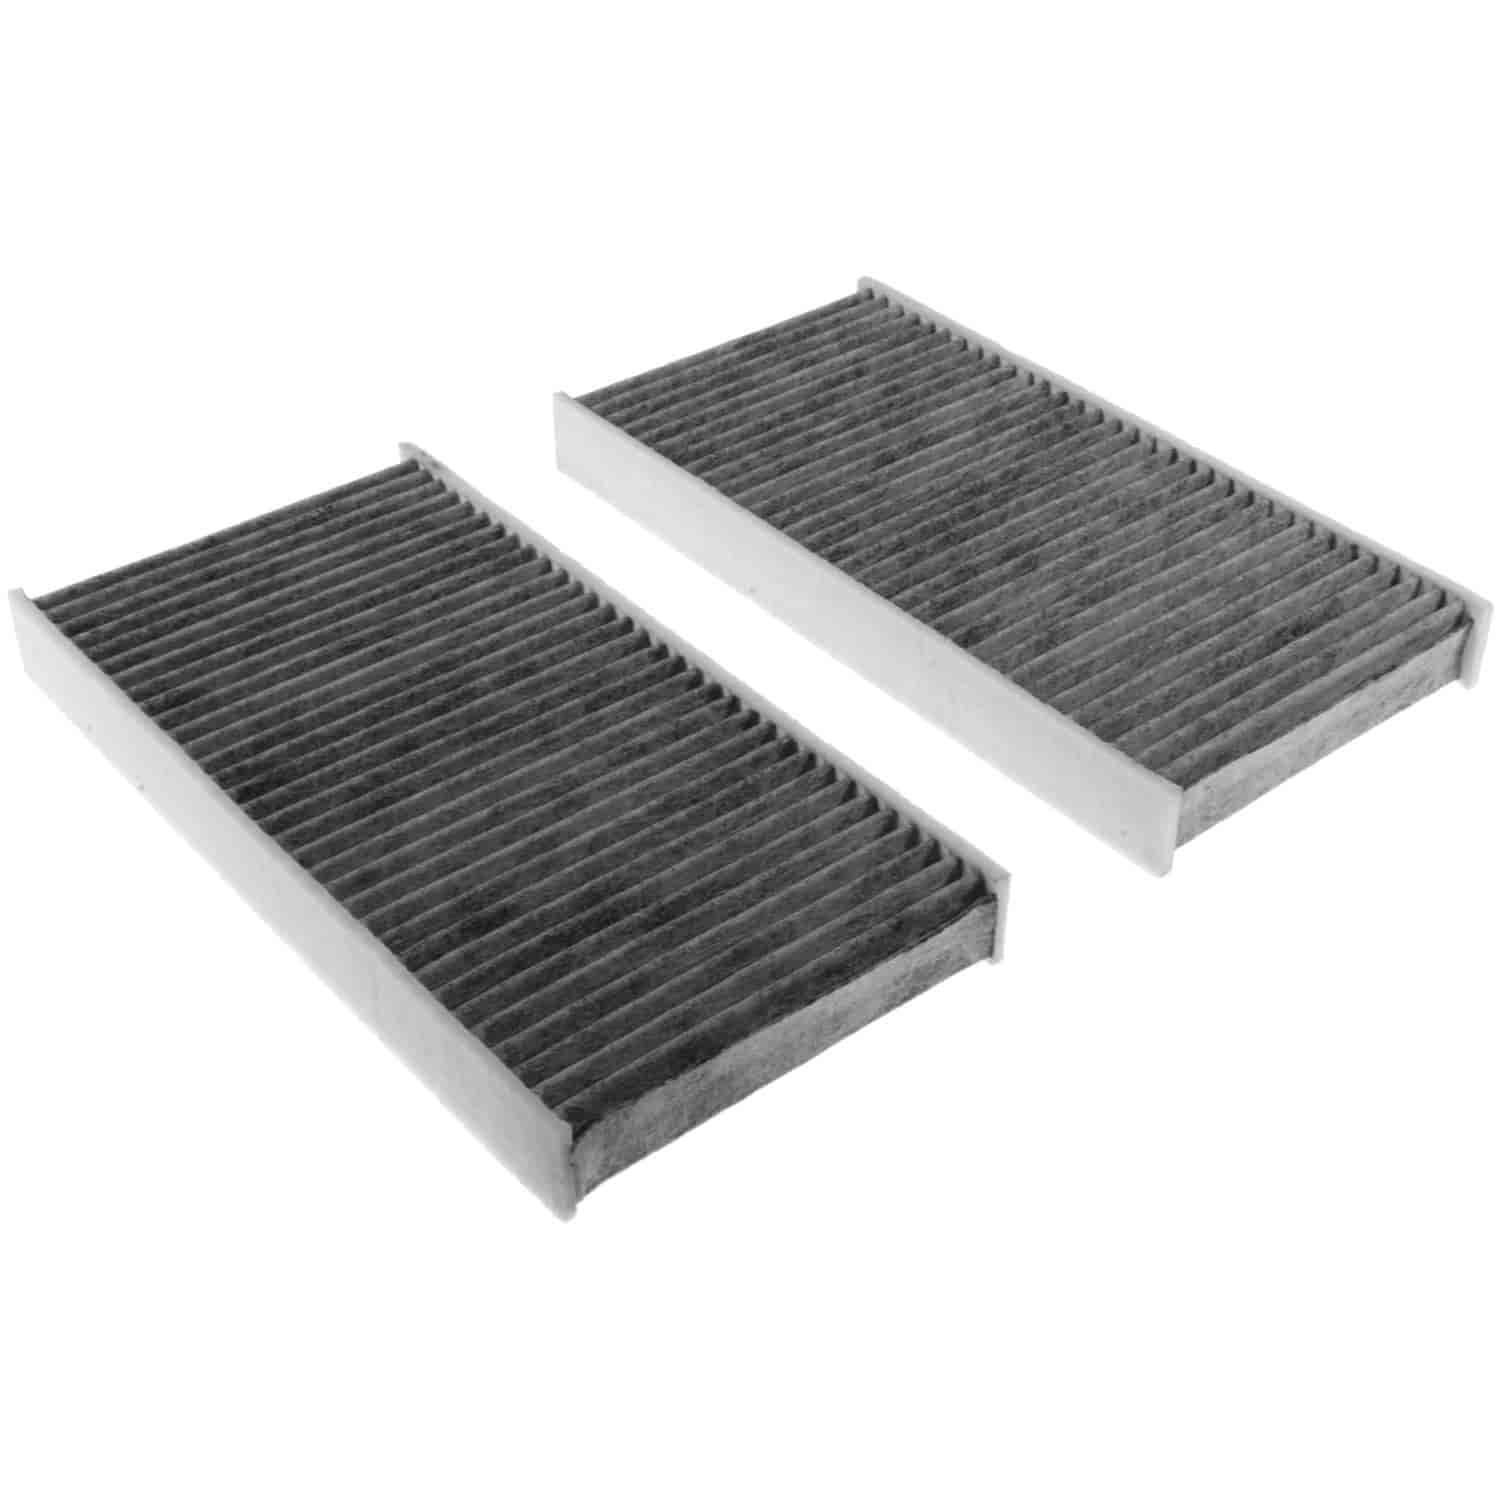 Mahle Cabin Air Filter for Nissan Quest 2004-2009